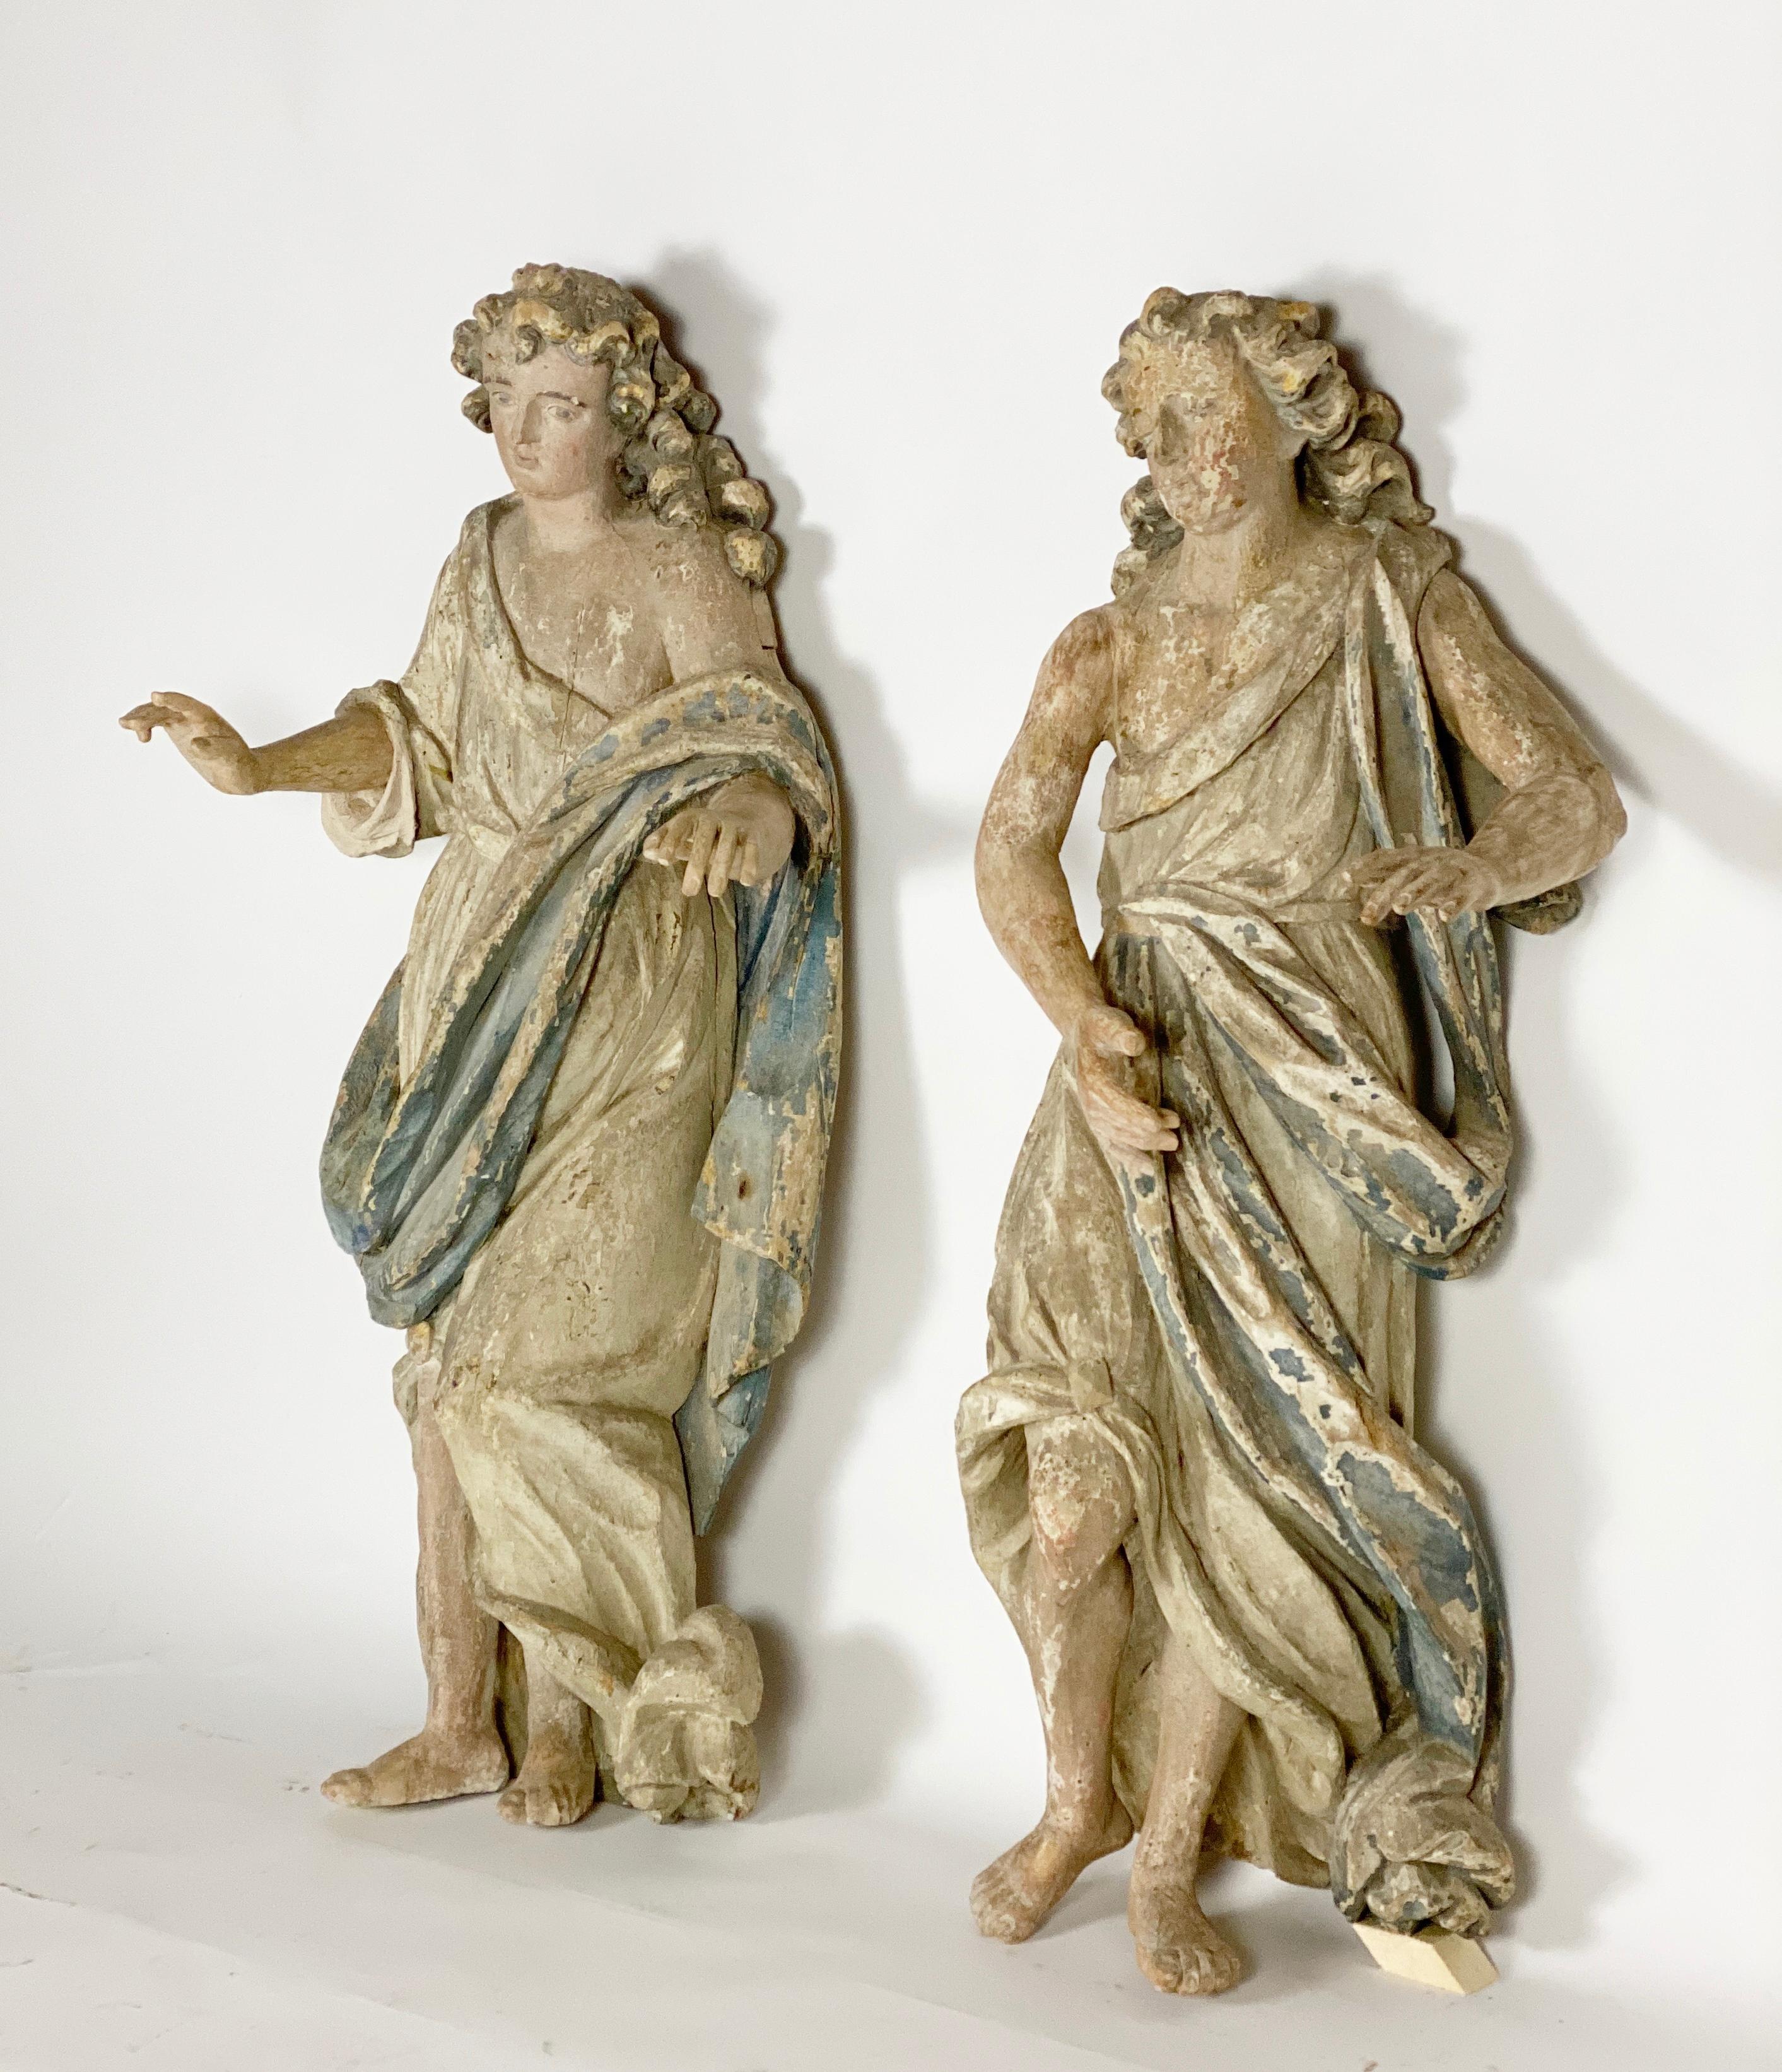 Pair of wood angels sculptures - France, 18th century.